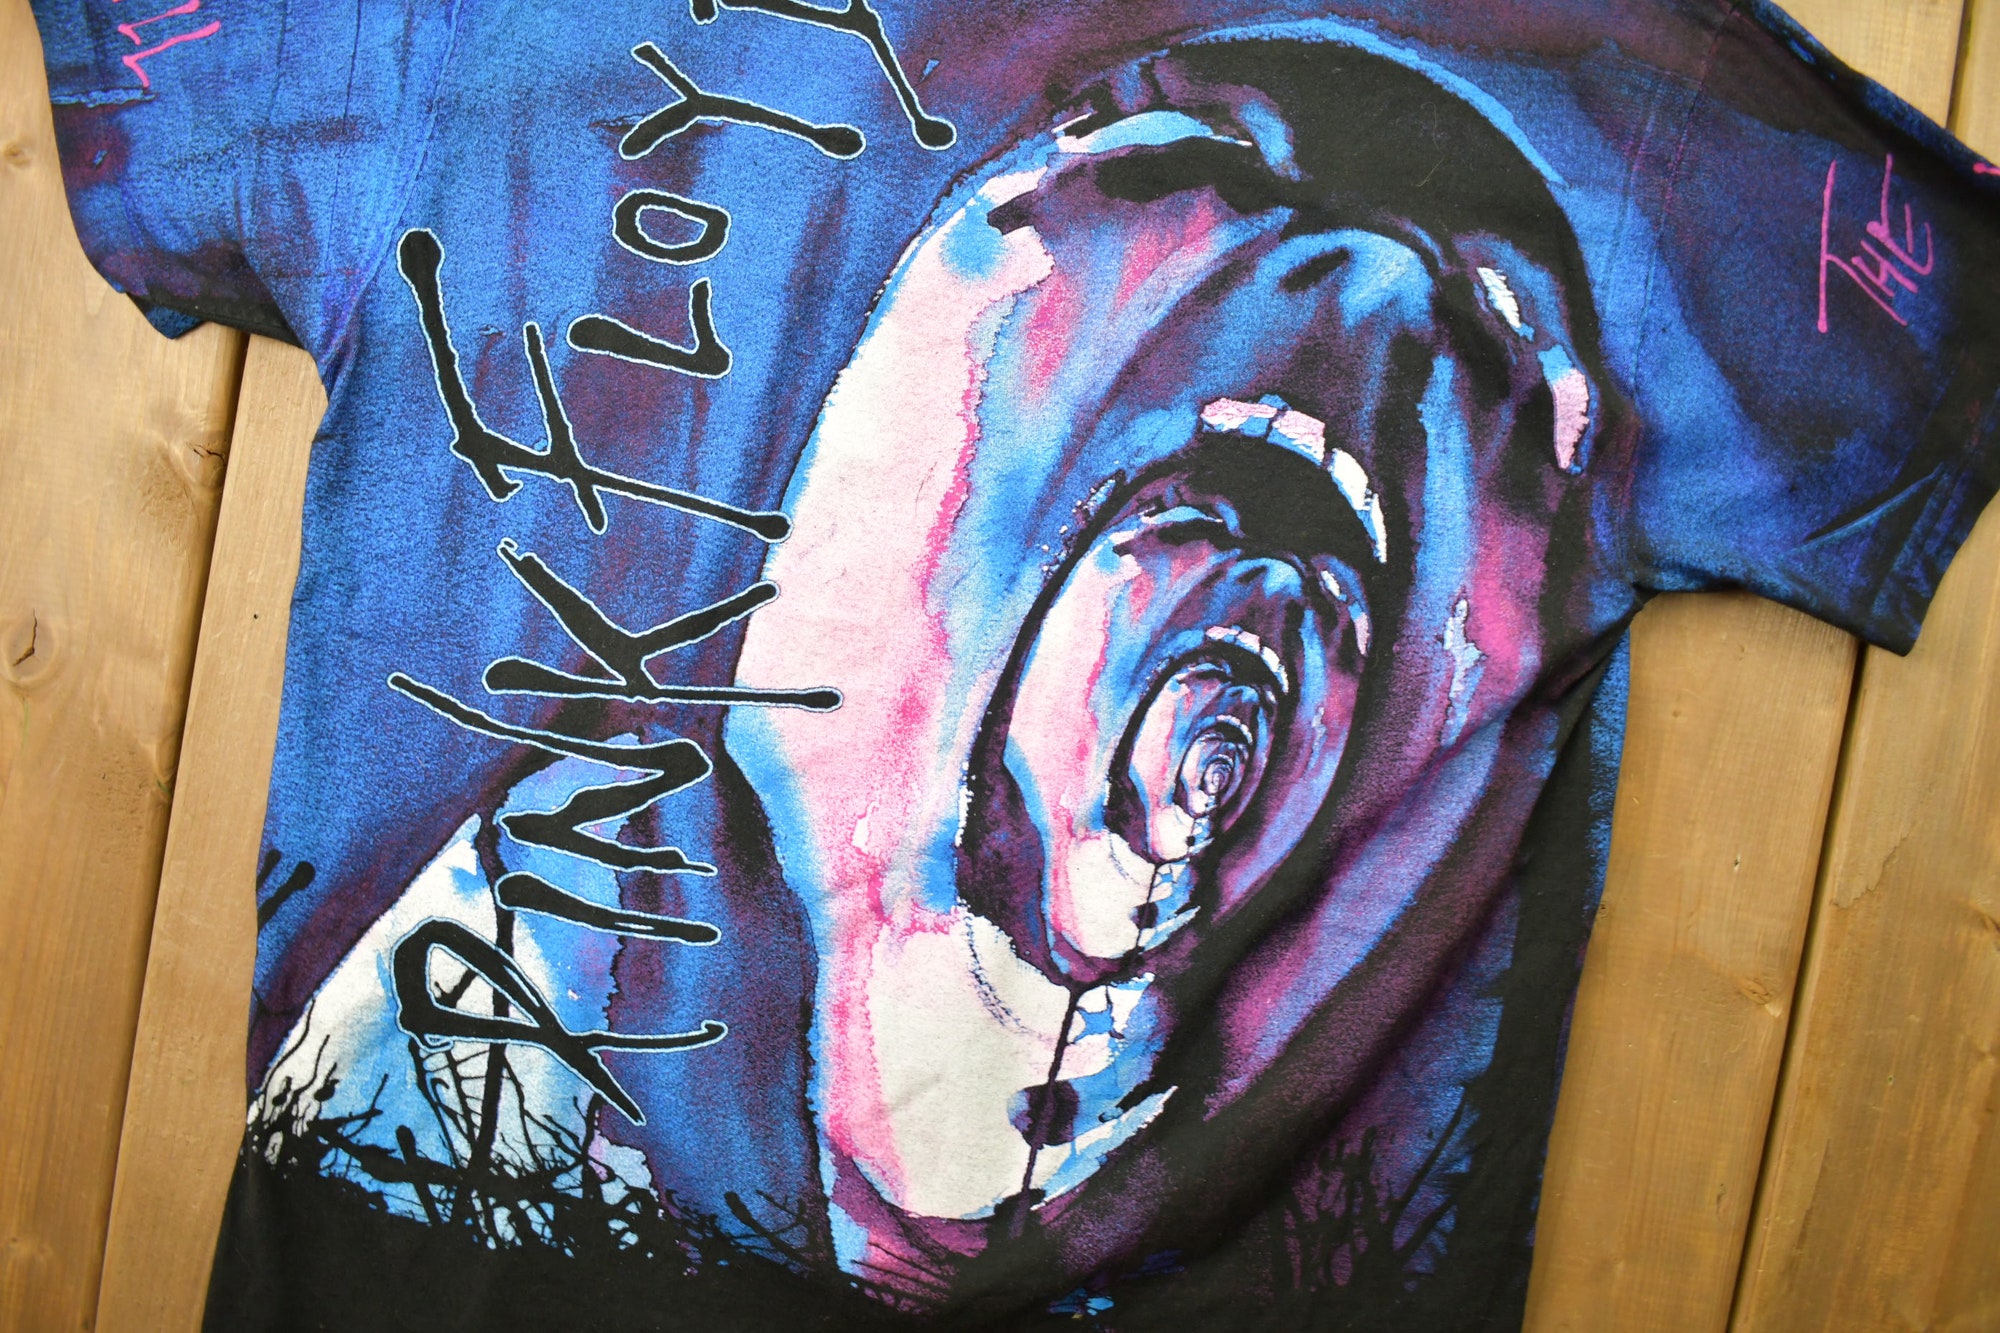 Vintage 1994 Pink Floyd Off The Wall Screaming Face T-shirt